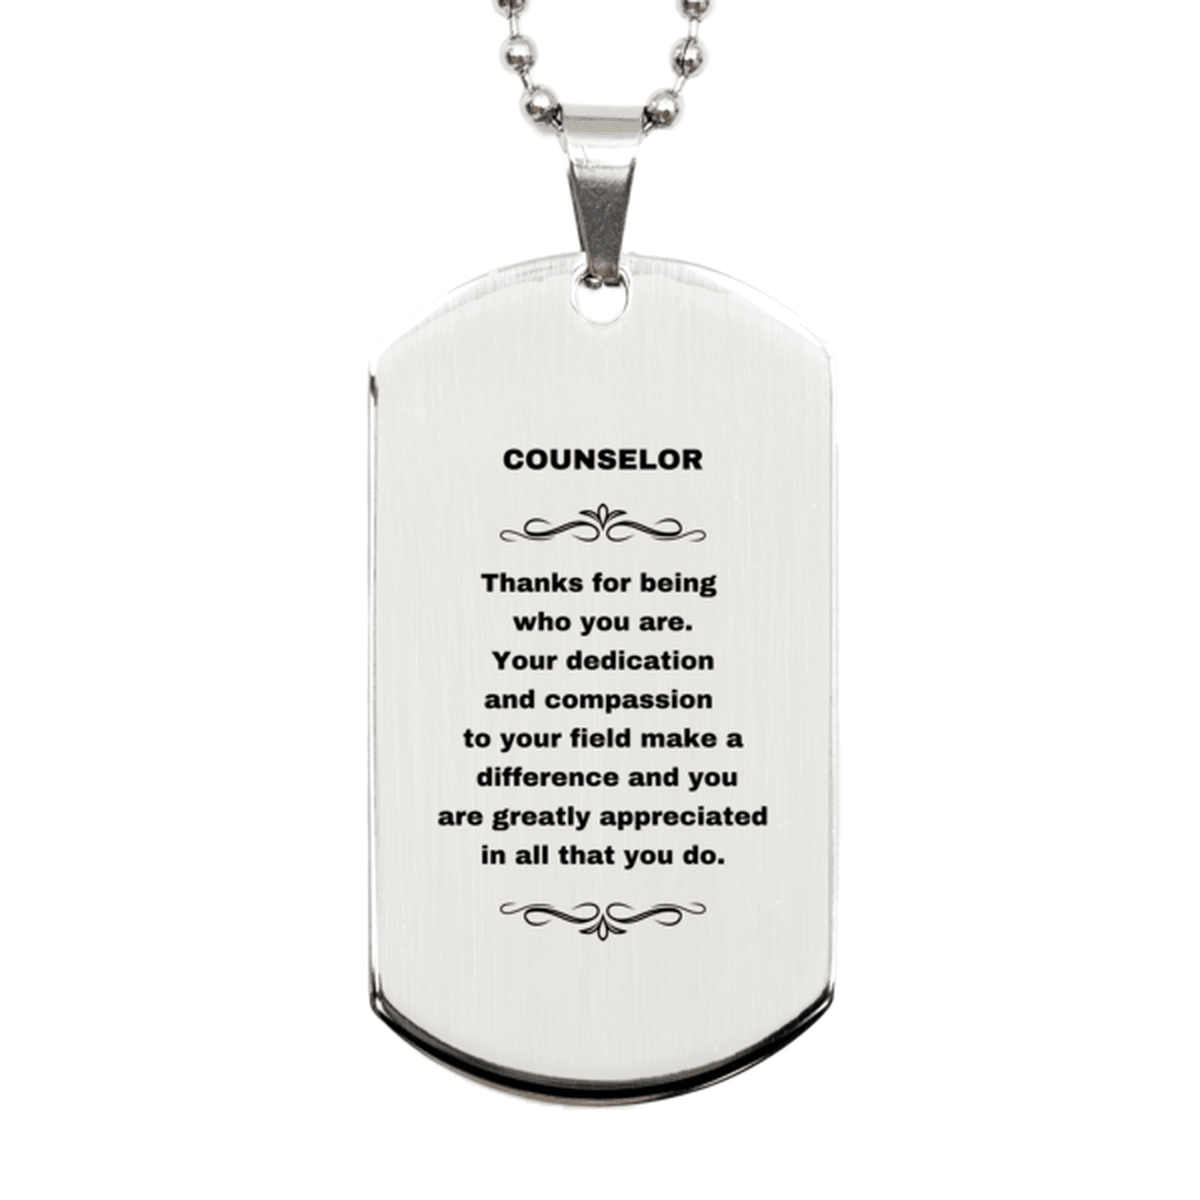 Counselor Silver Dog Tag Necklace Engraved Bracelet - Thanks for being who you are - Birthday Christmas Jewelry Gifts Coworkers Colleague Boss - Mallard Moon Gift Shop